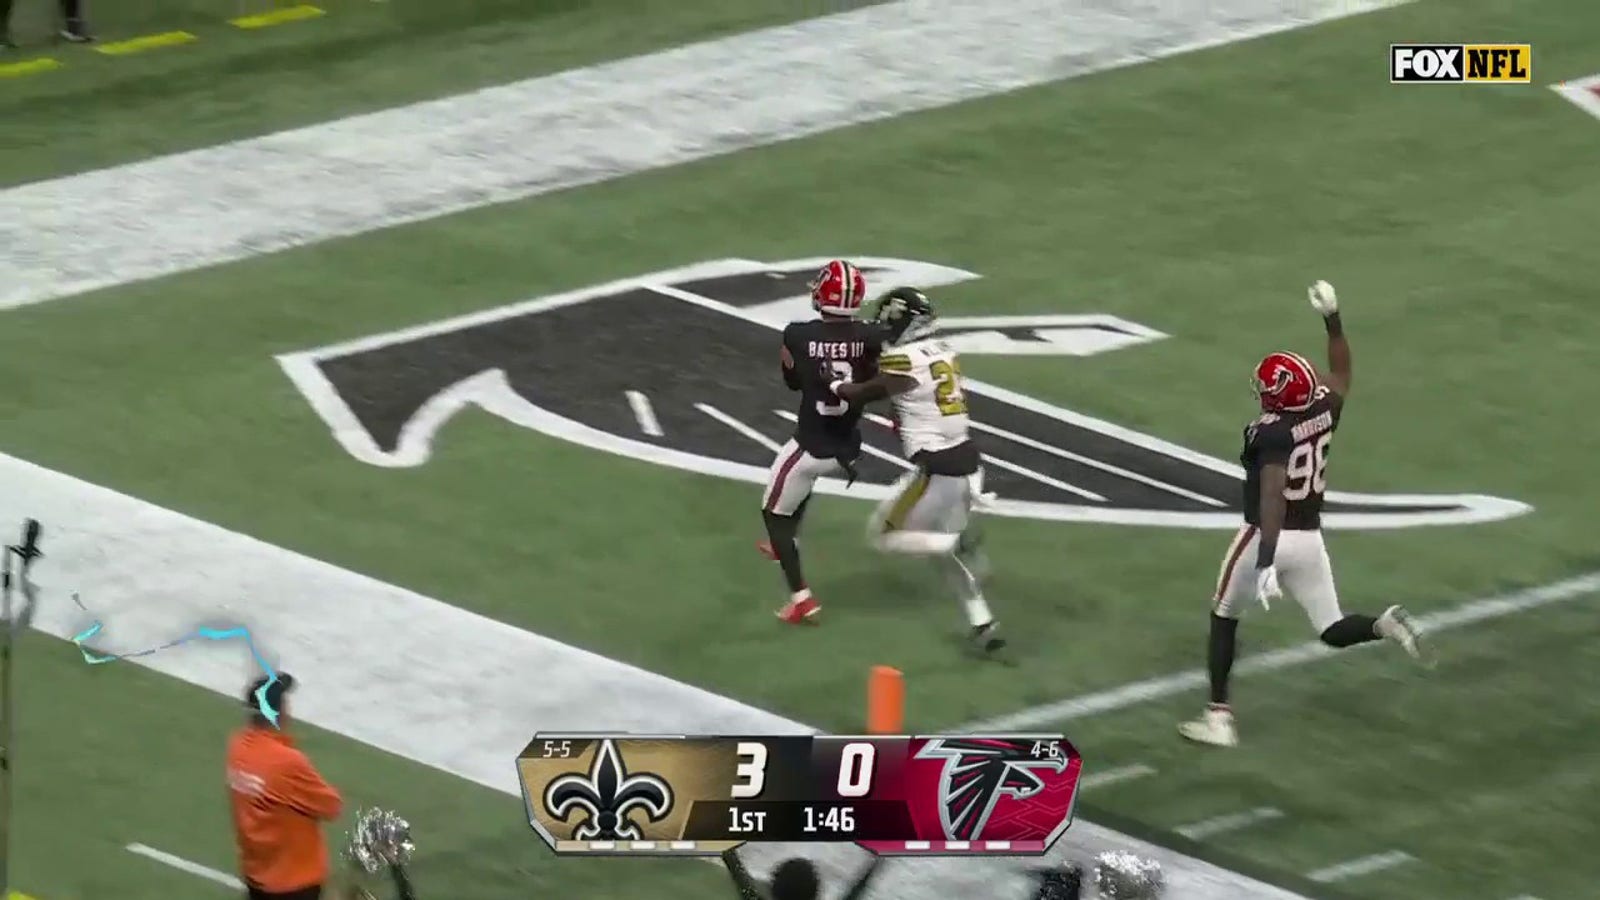 Jessie Bates snags 92-yard pick-six to give Falcons lead over Saints